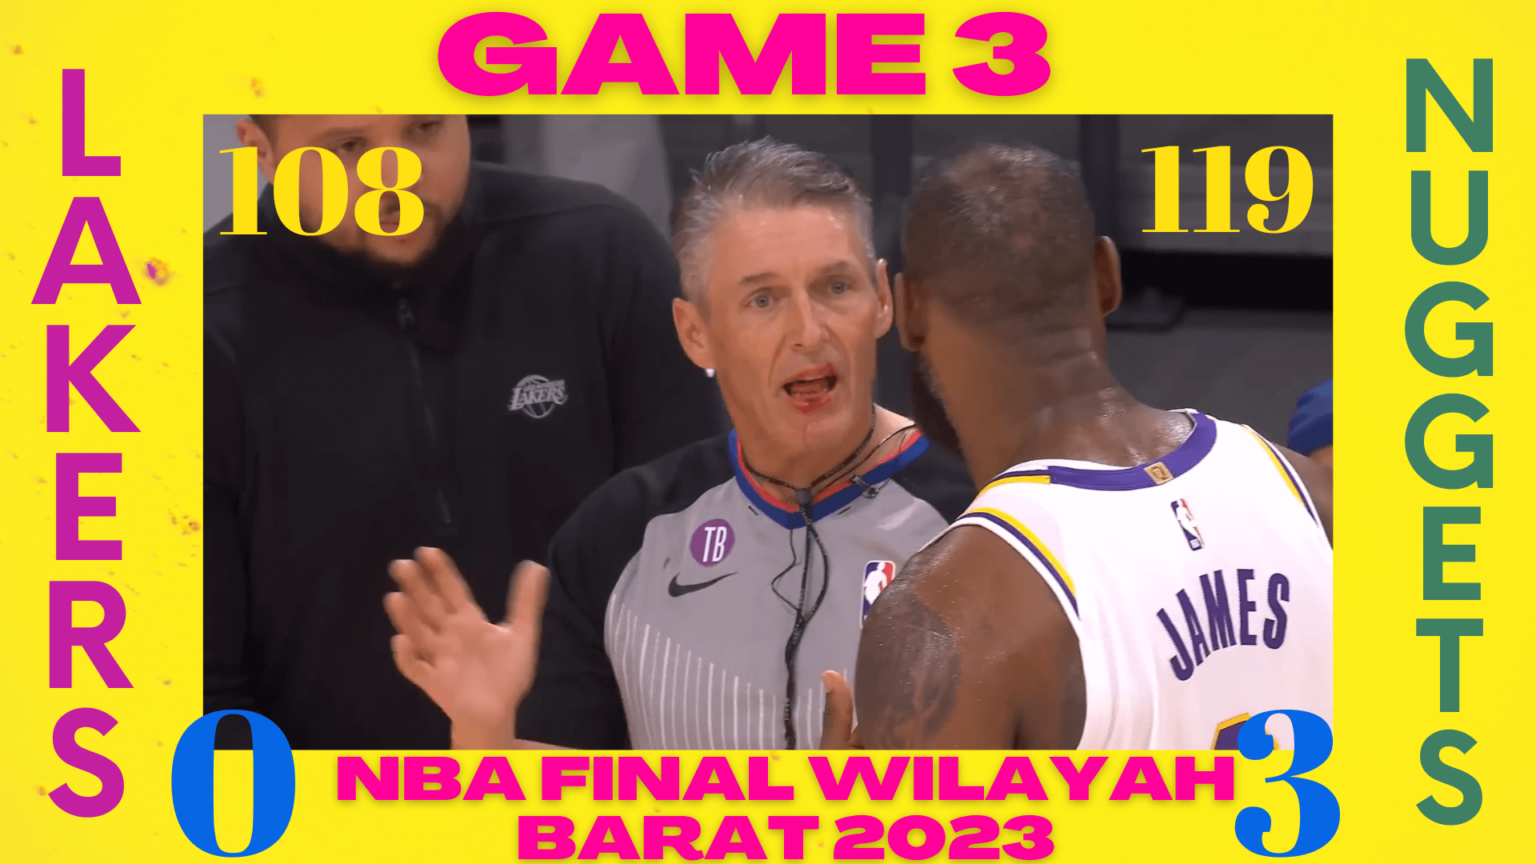 lakers lost game 3 wcf final